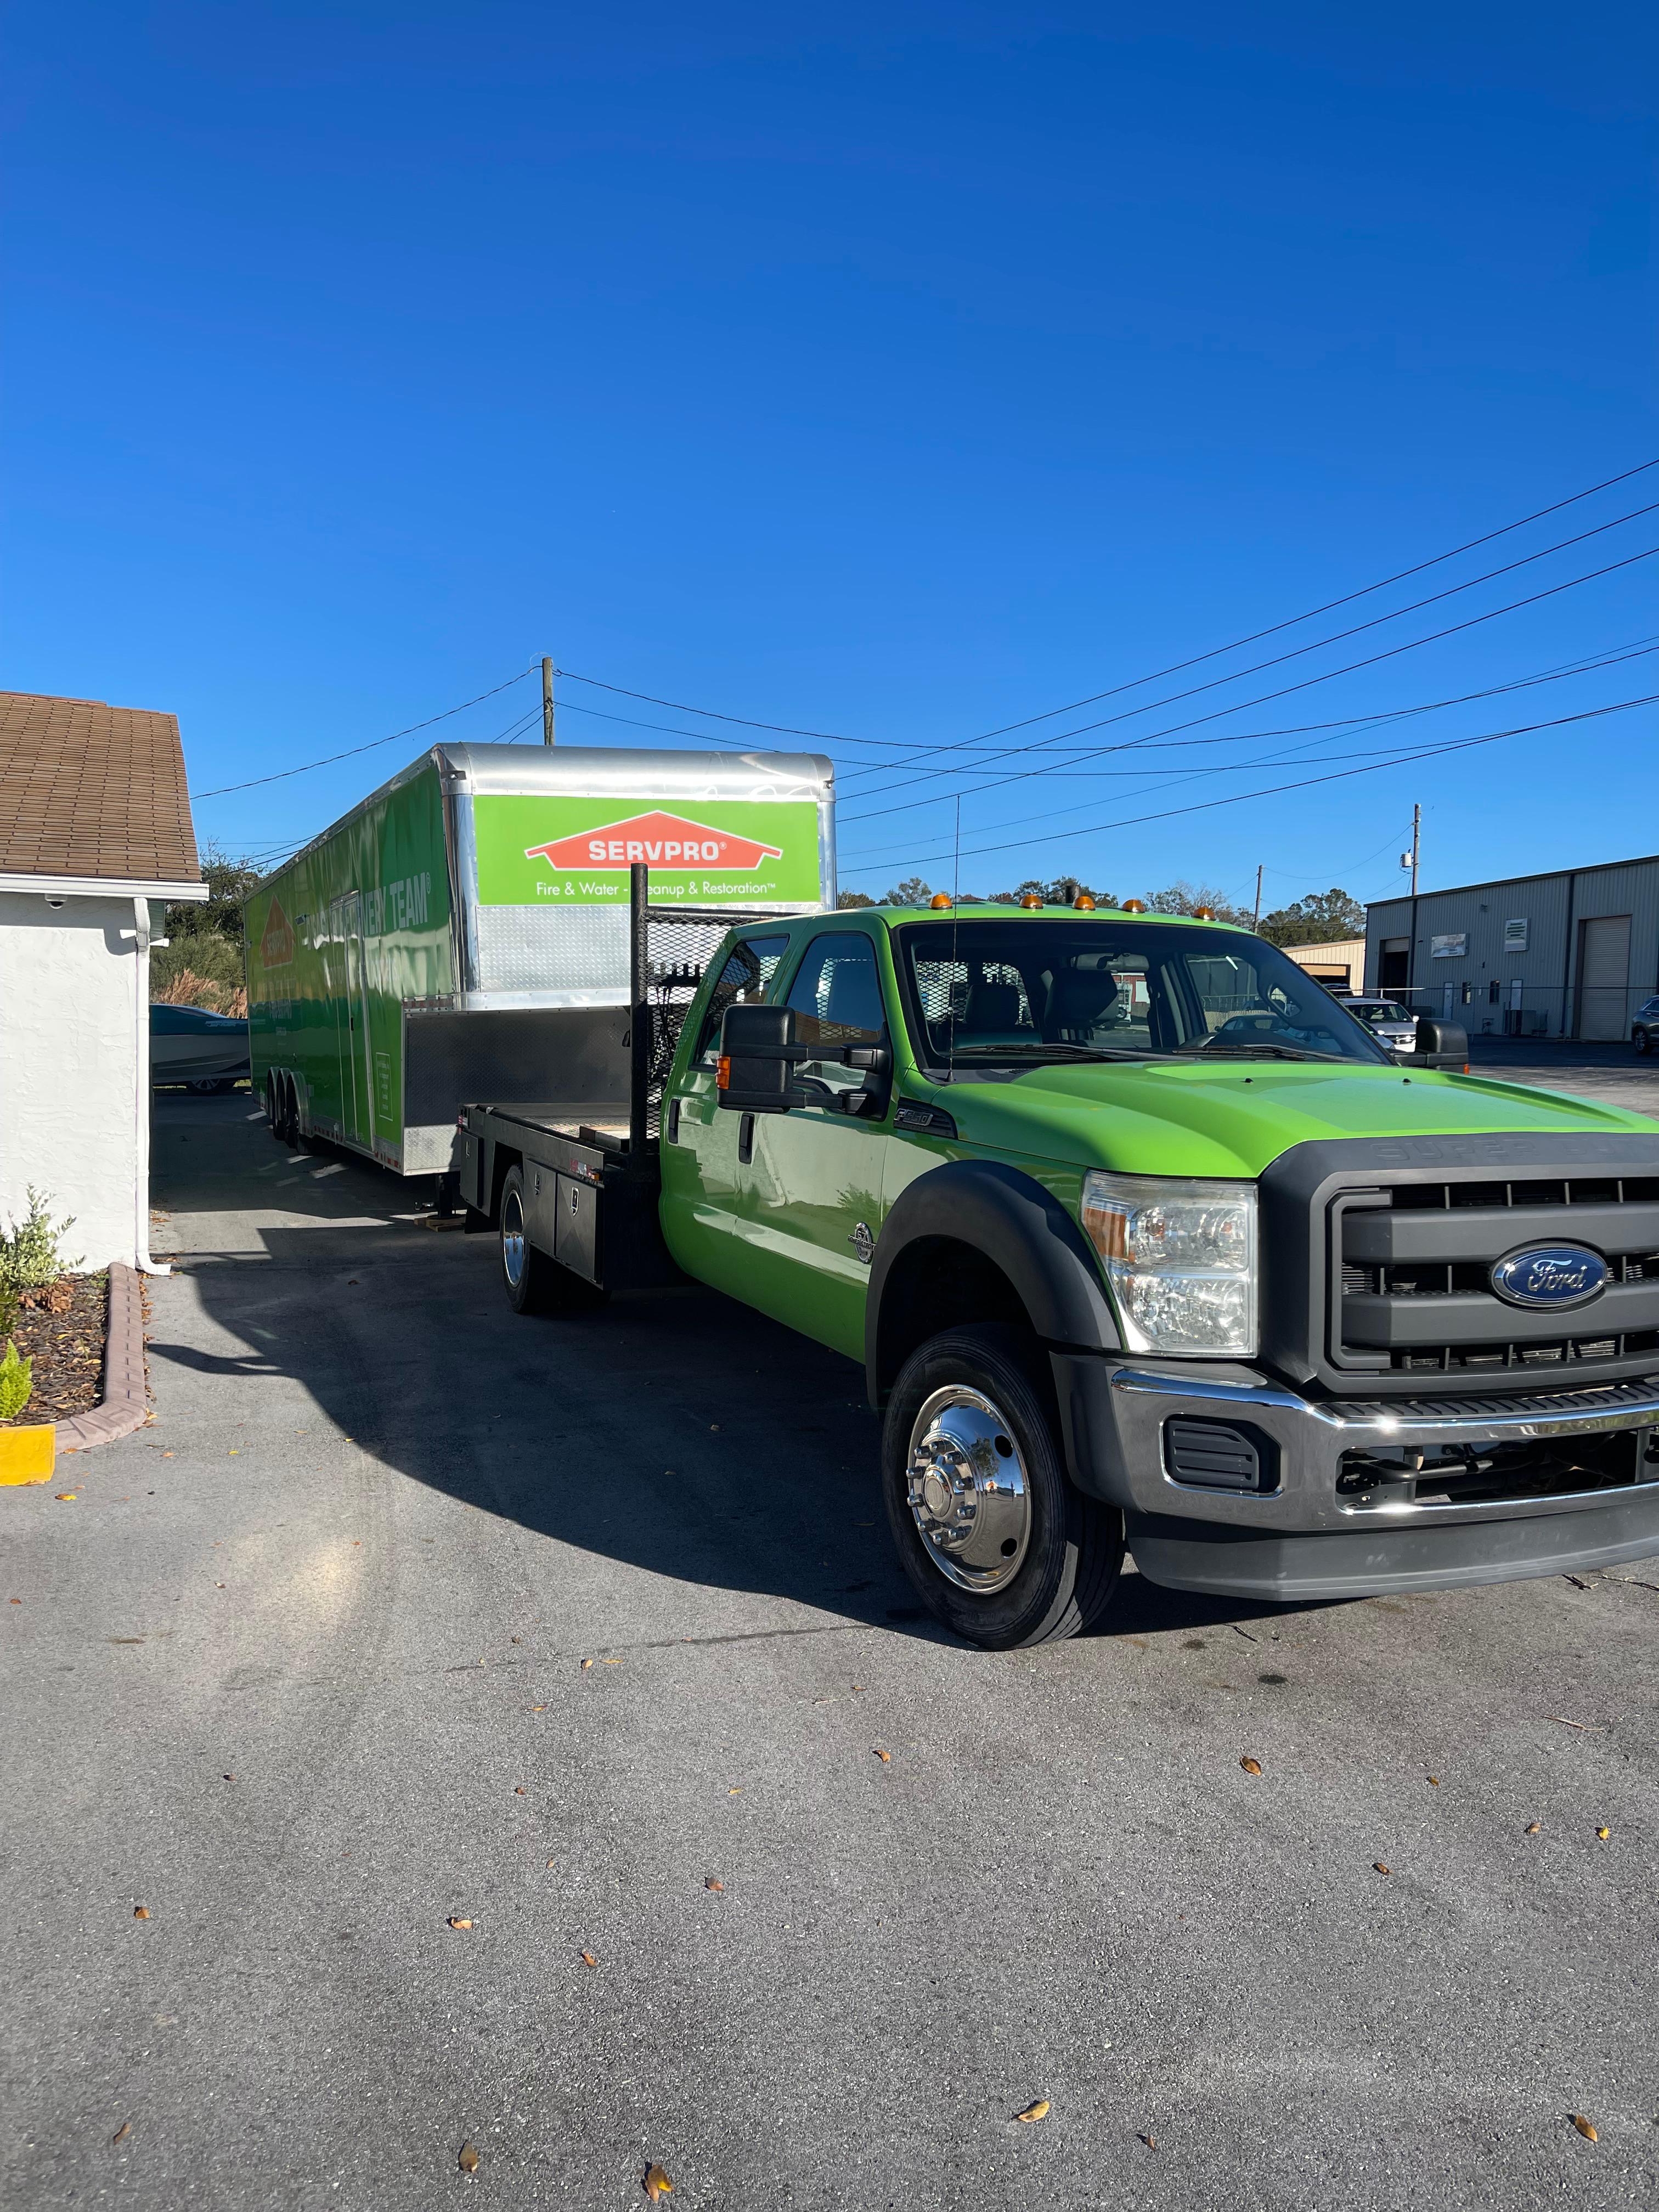 SERVPRO trailer ready for dispatch